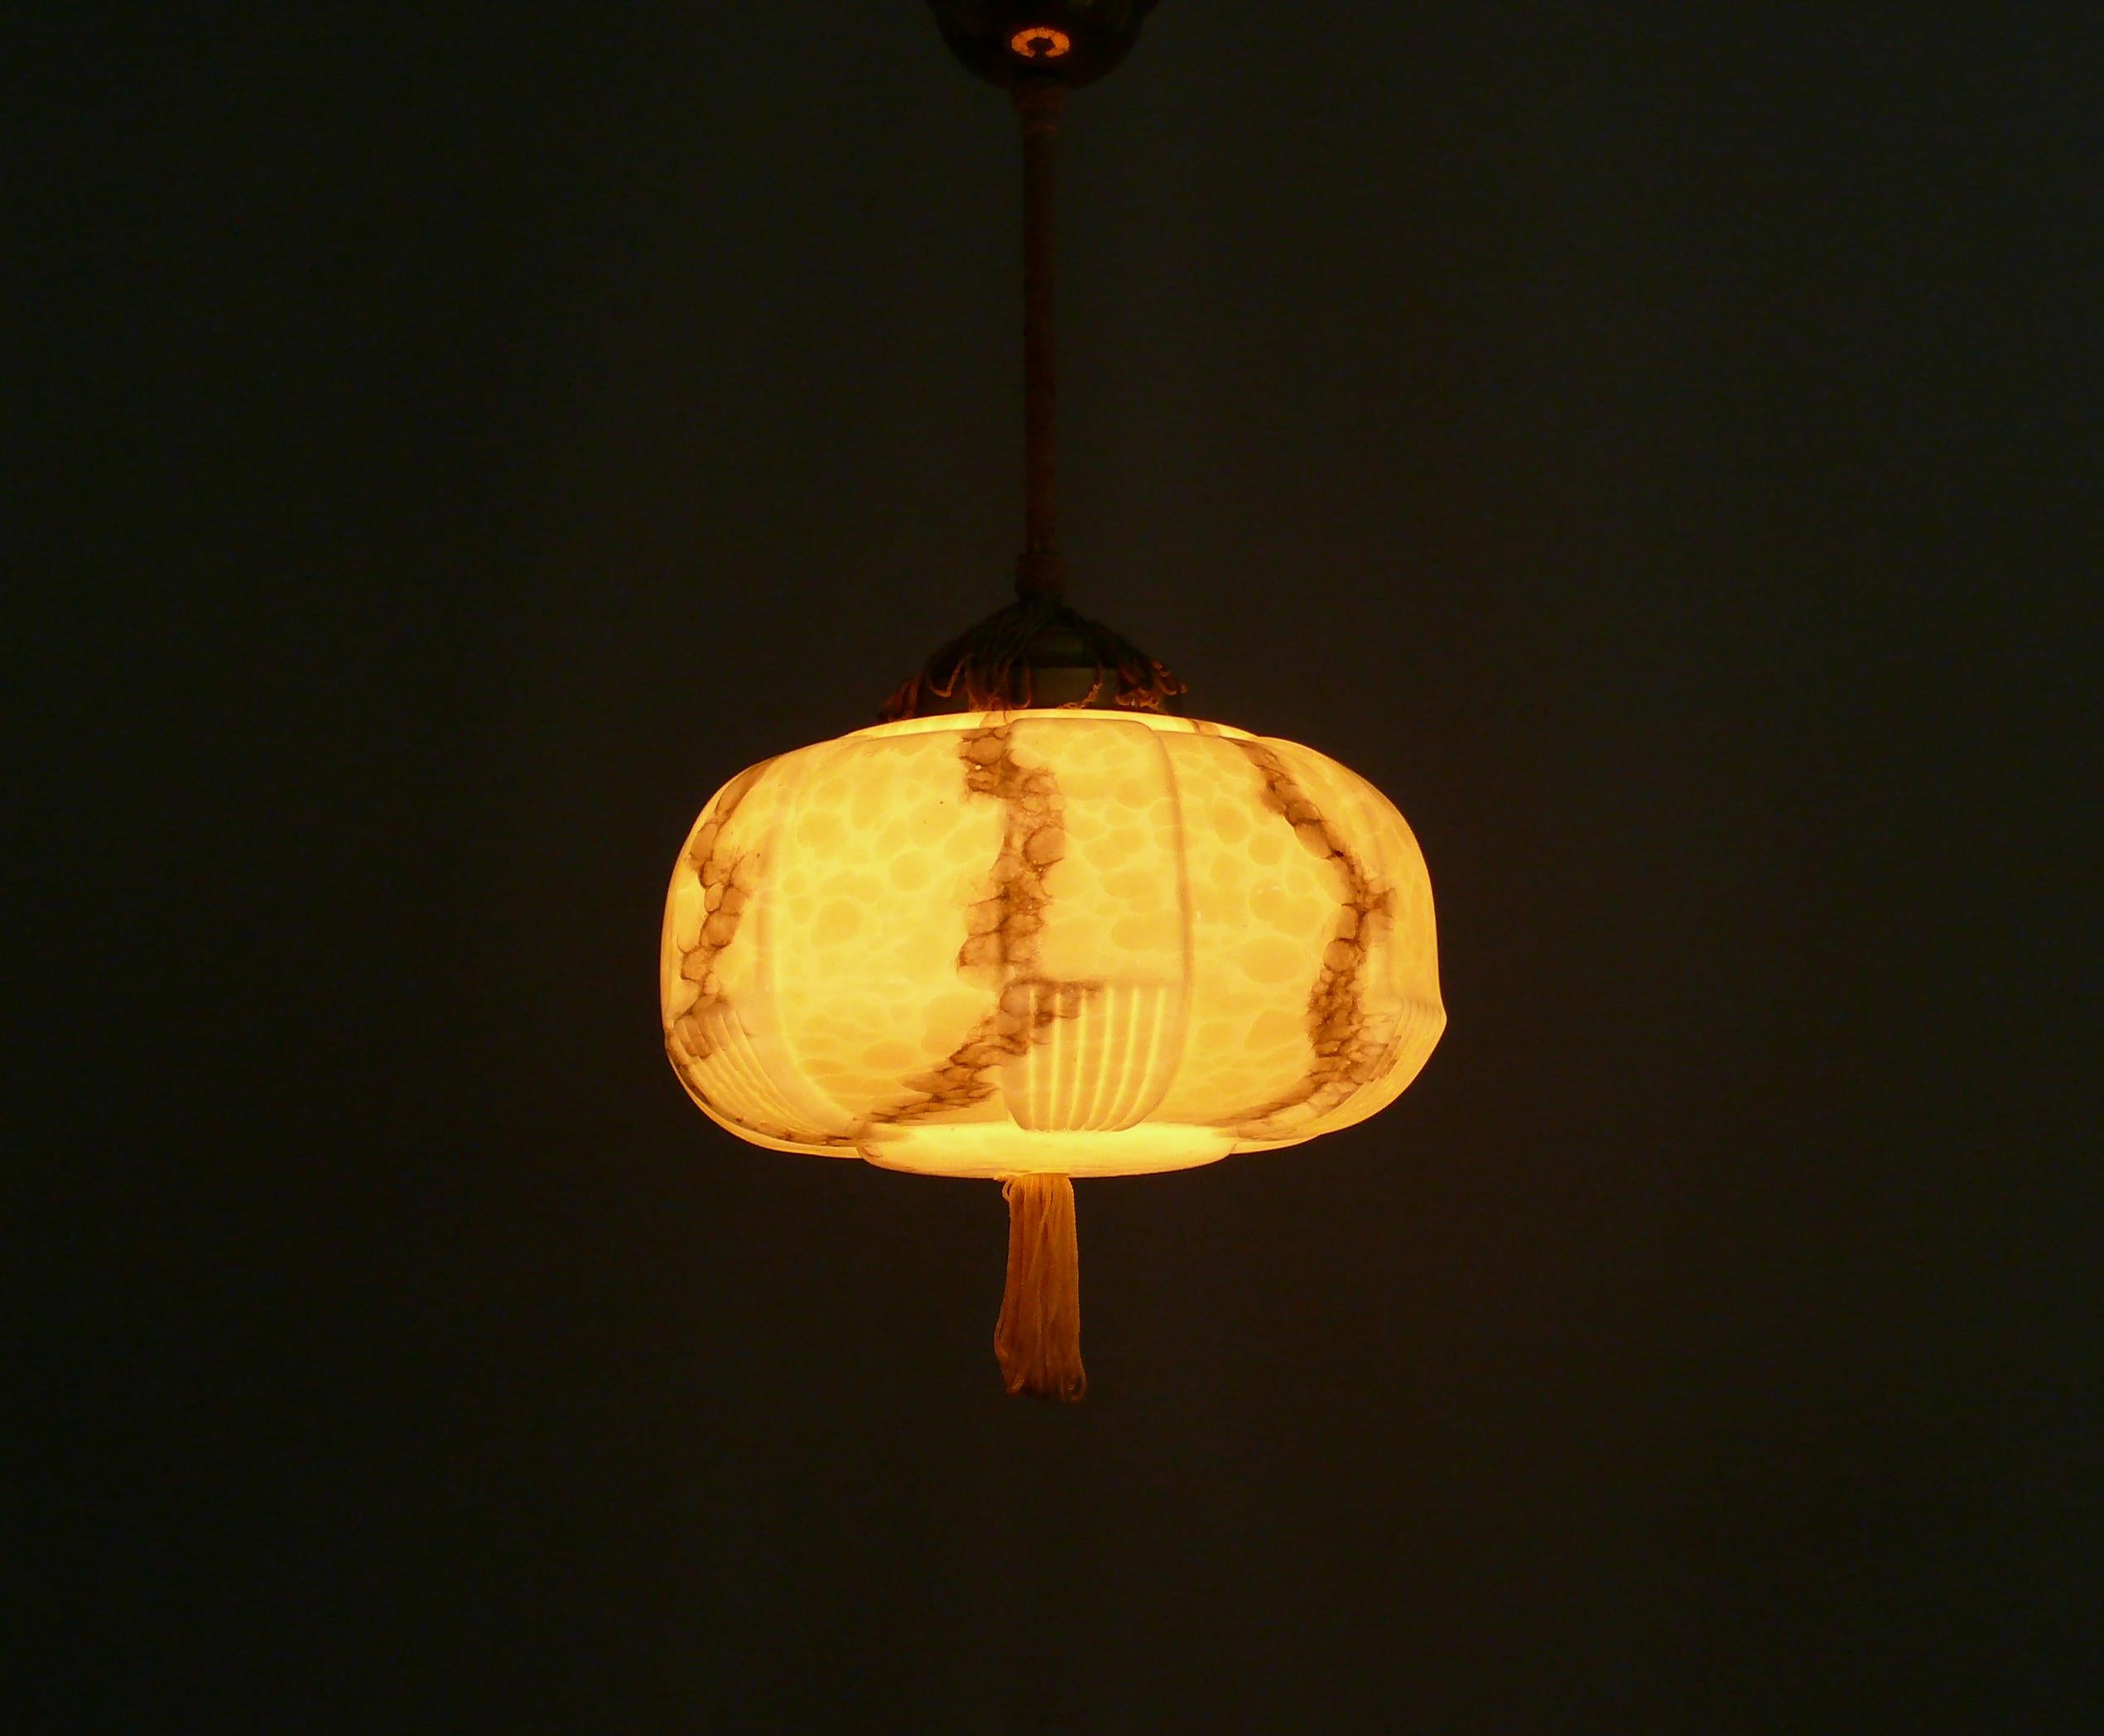 Art Deco rod pendant lamp from the 1930s - 1940s with a very beautiful profiled, beige glass shade in good condition. The glass shade has subtle marbling, profiling and a period-typical tassel on the underside of the shade. The glass holder and the